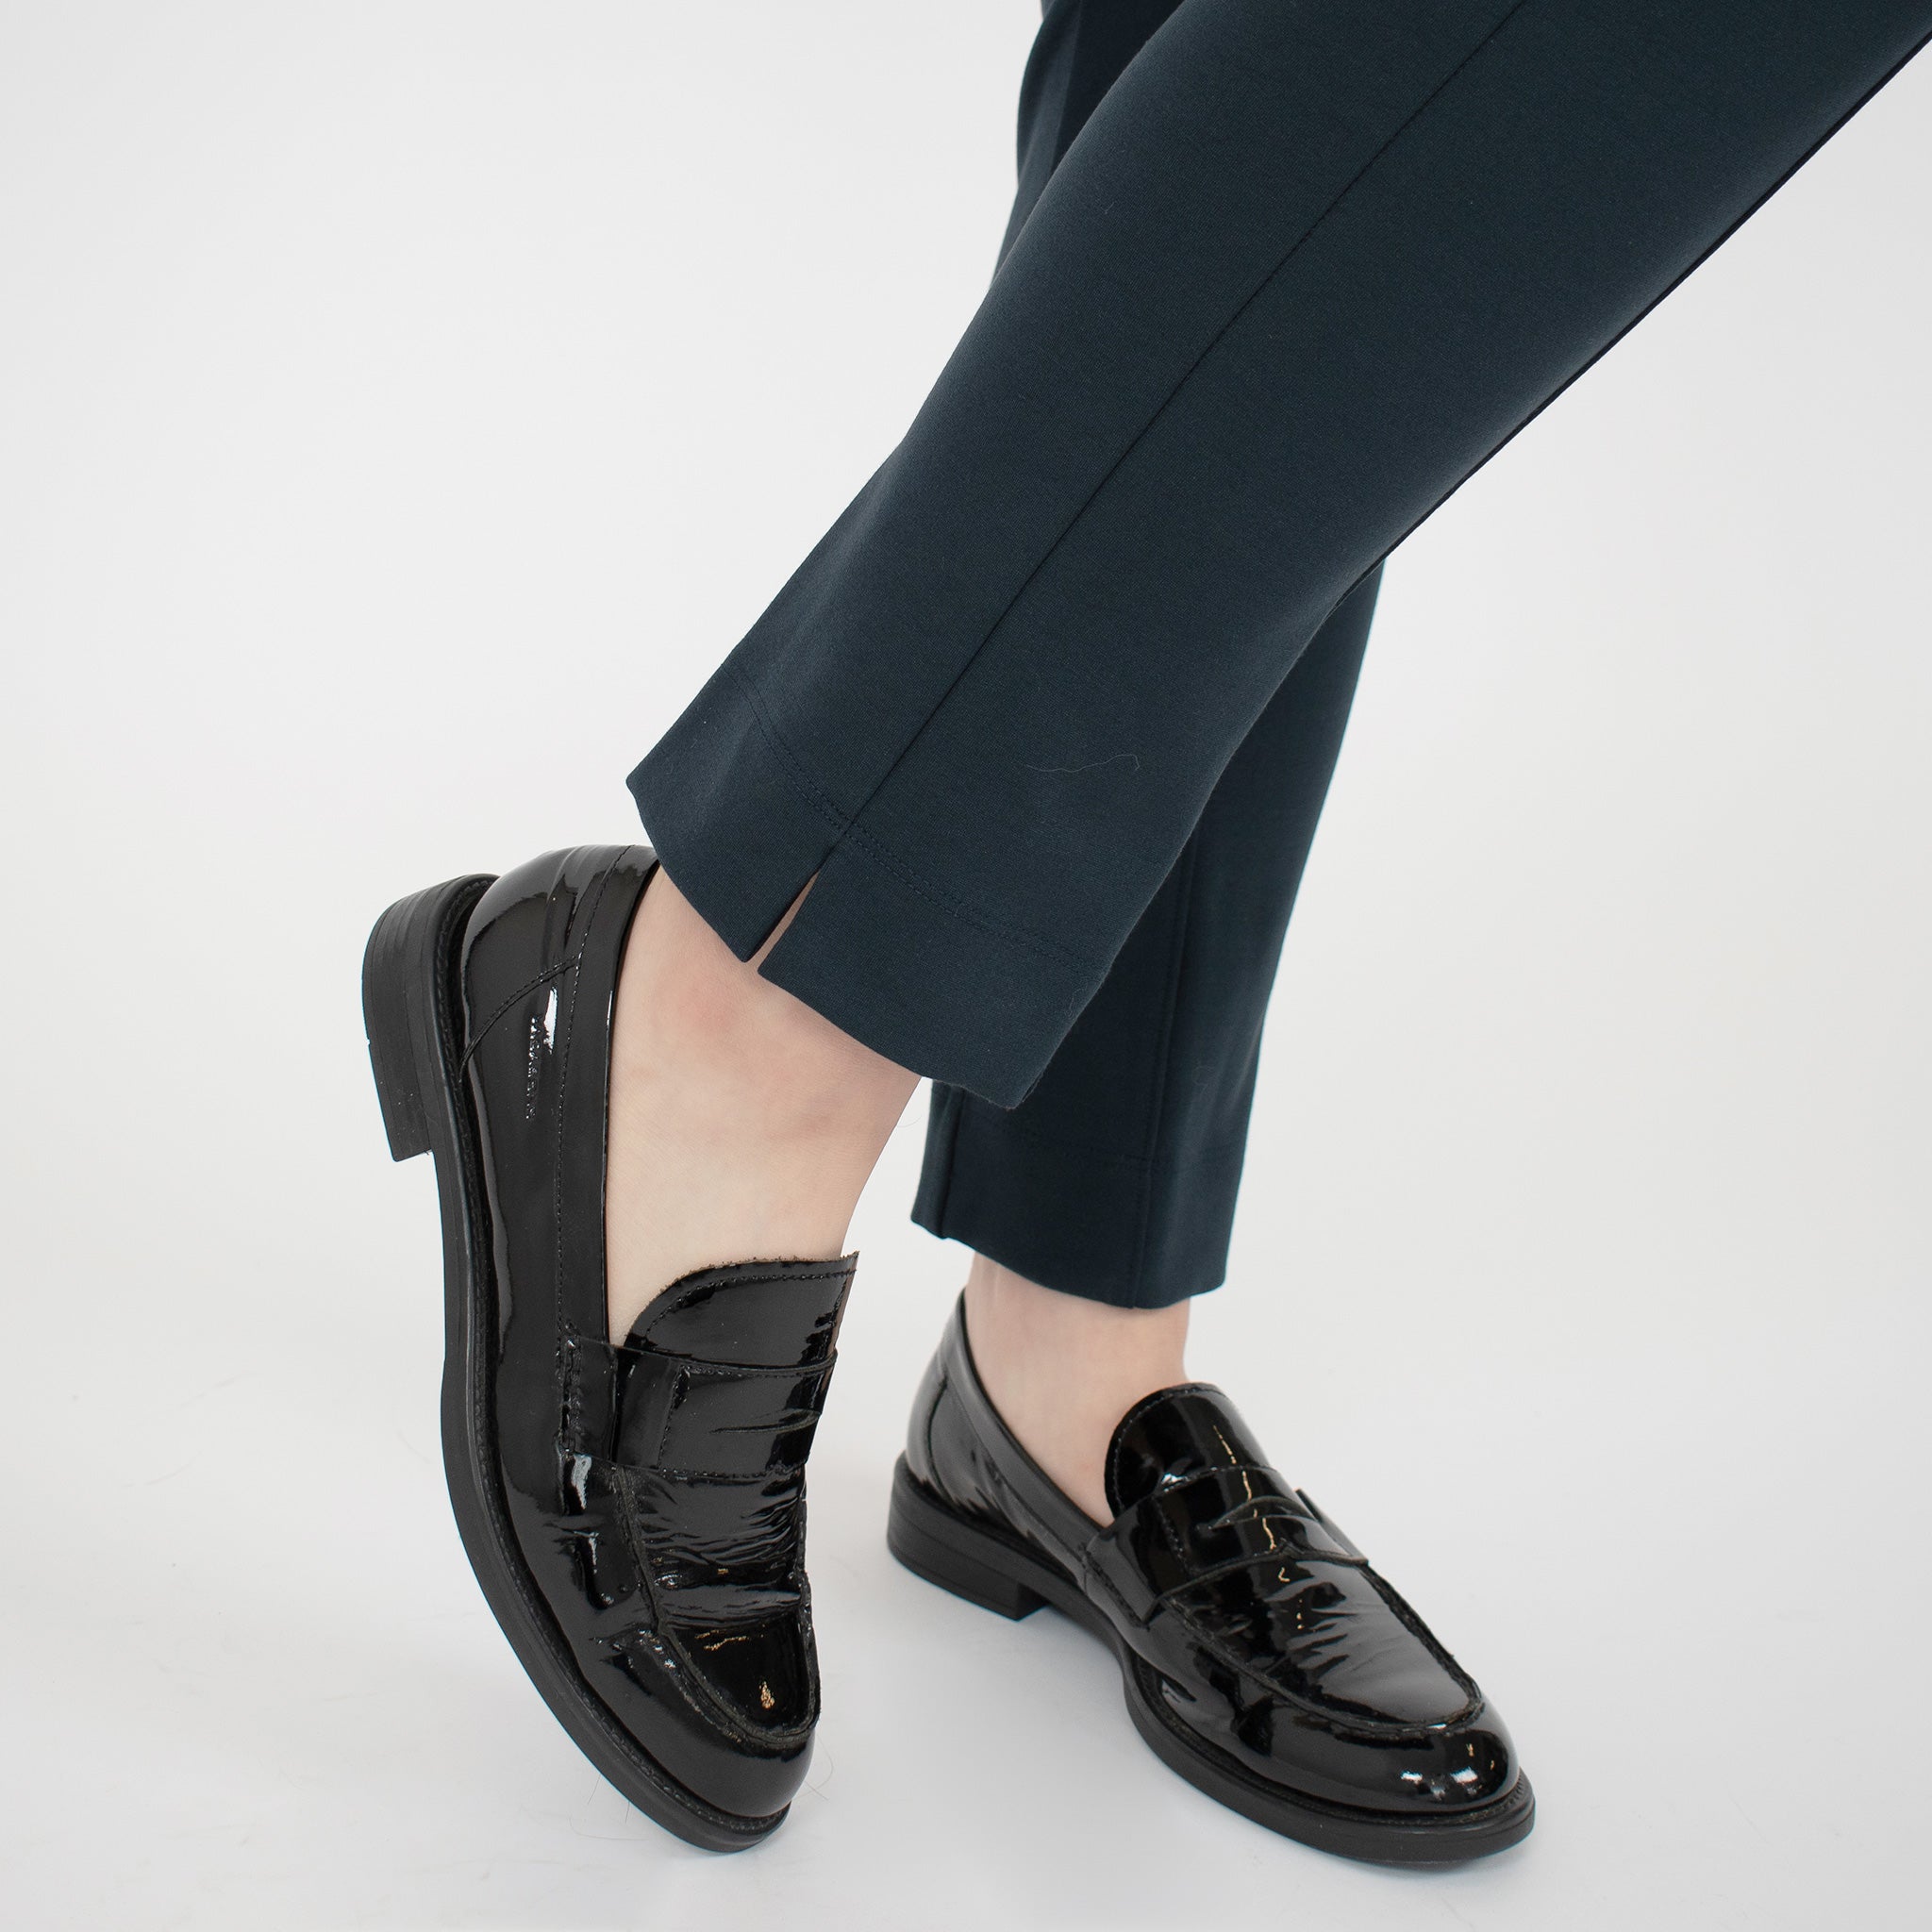 Ankle detail of a Tailored navy ankle length pant